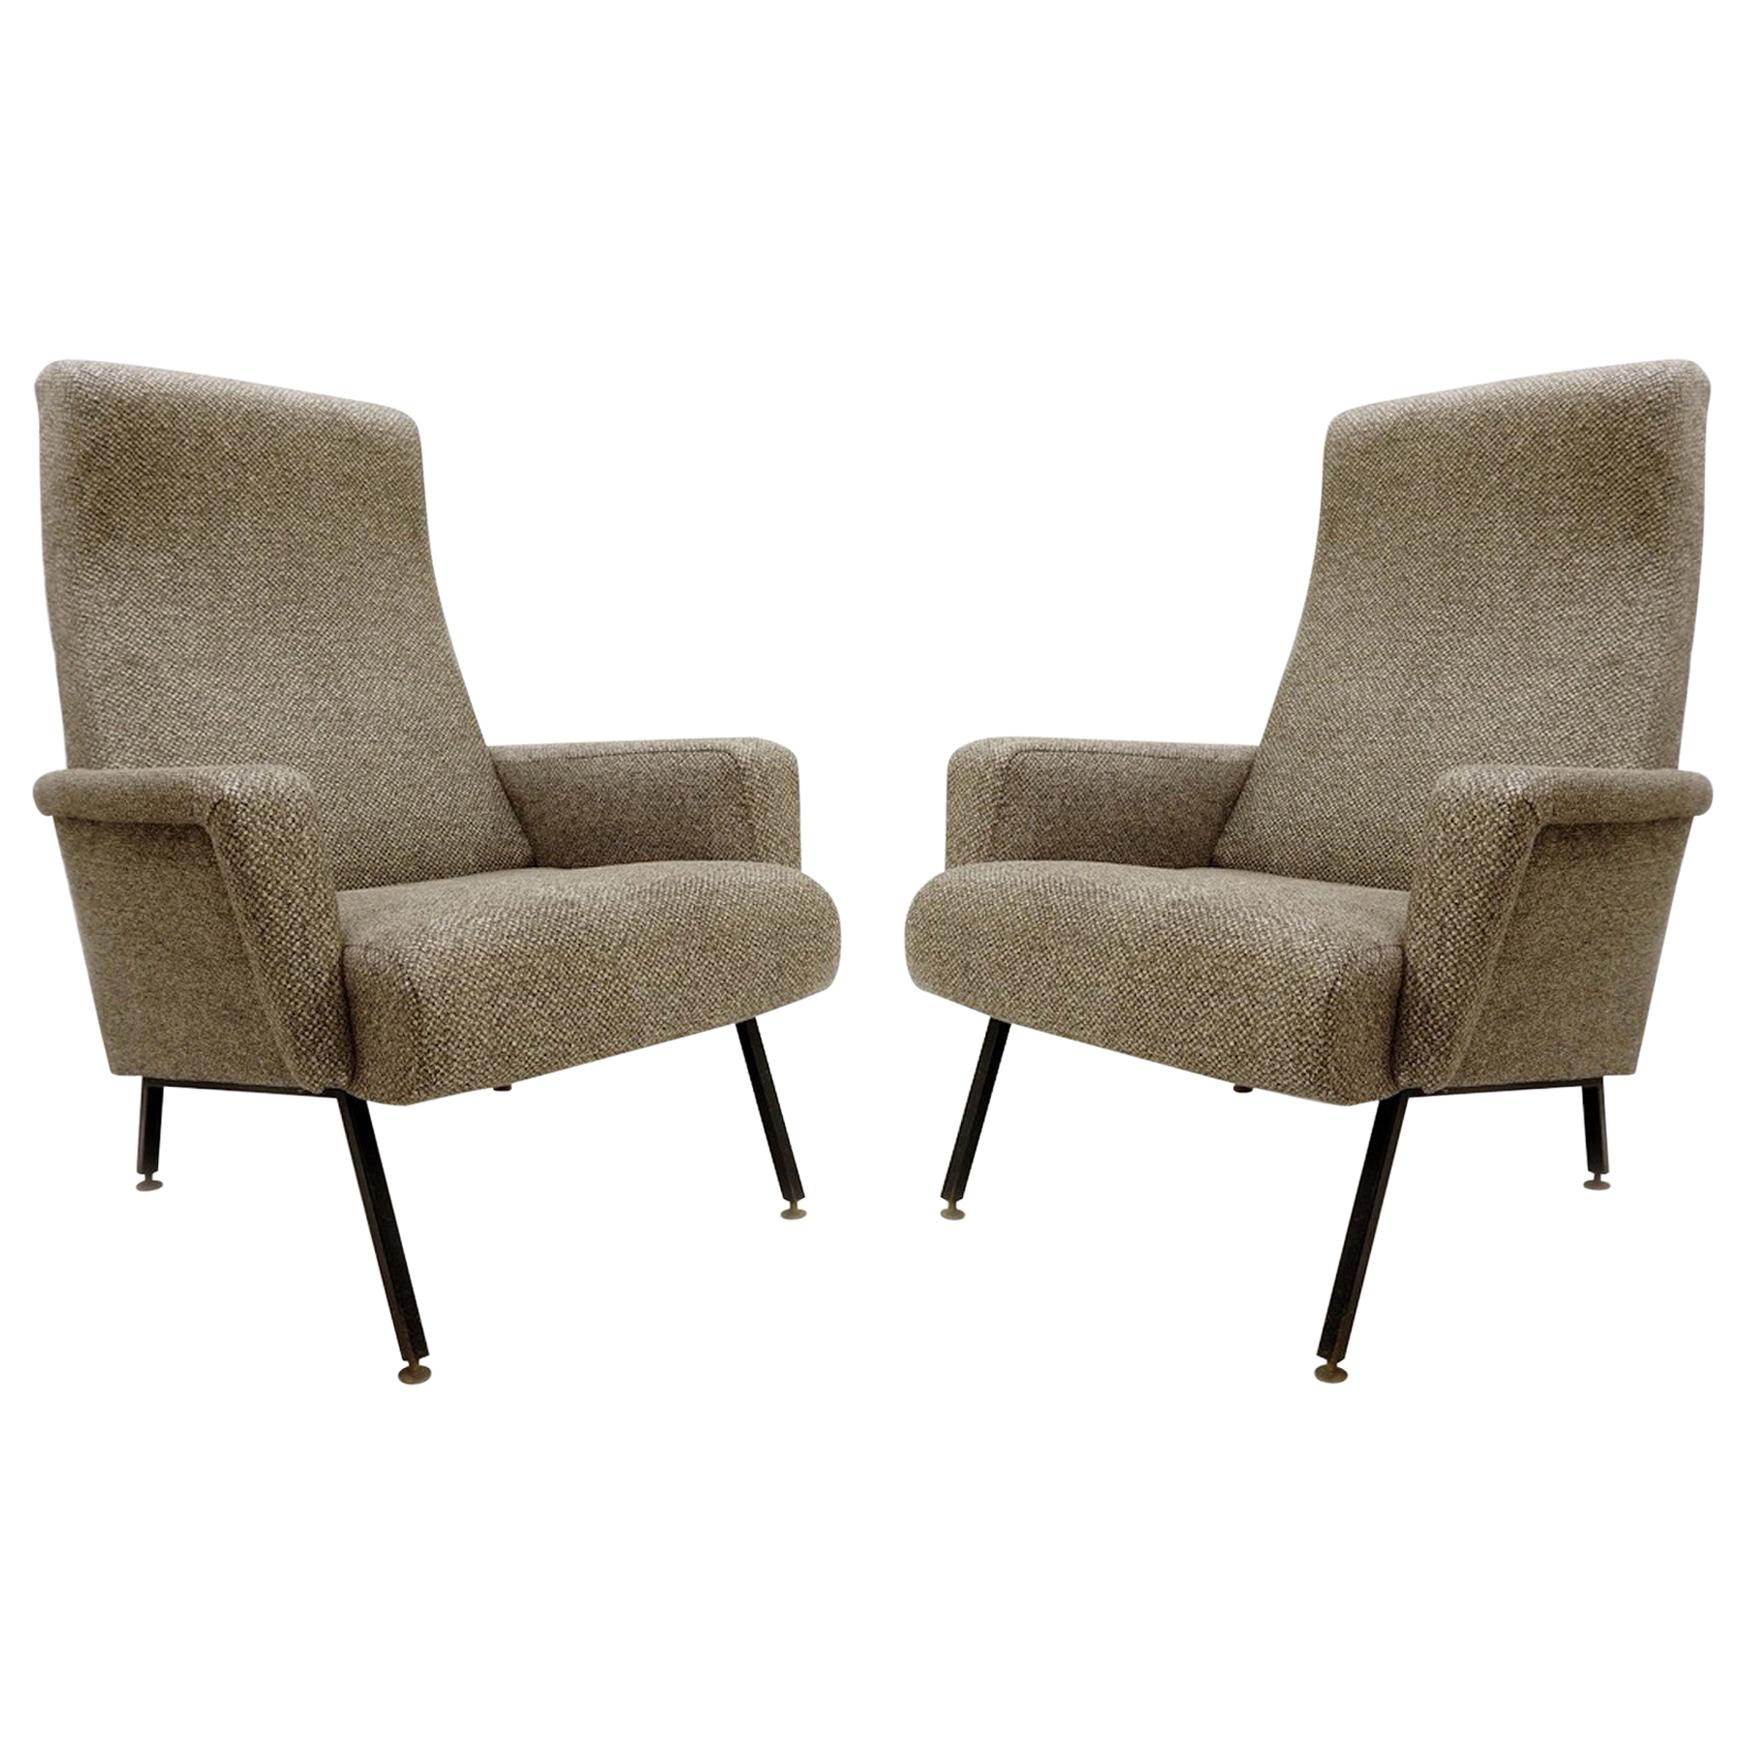 Italian Mid-Century Modern  Armchairs with Black Metal Structure from the 1950s